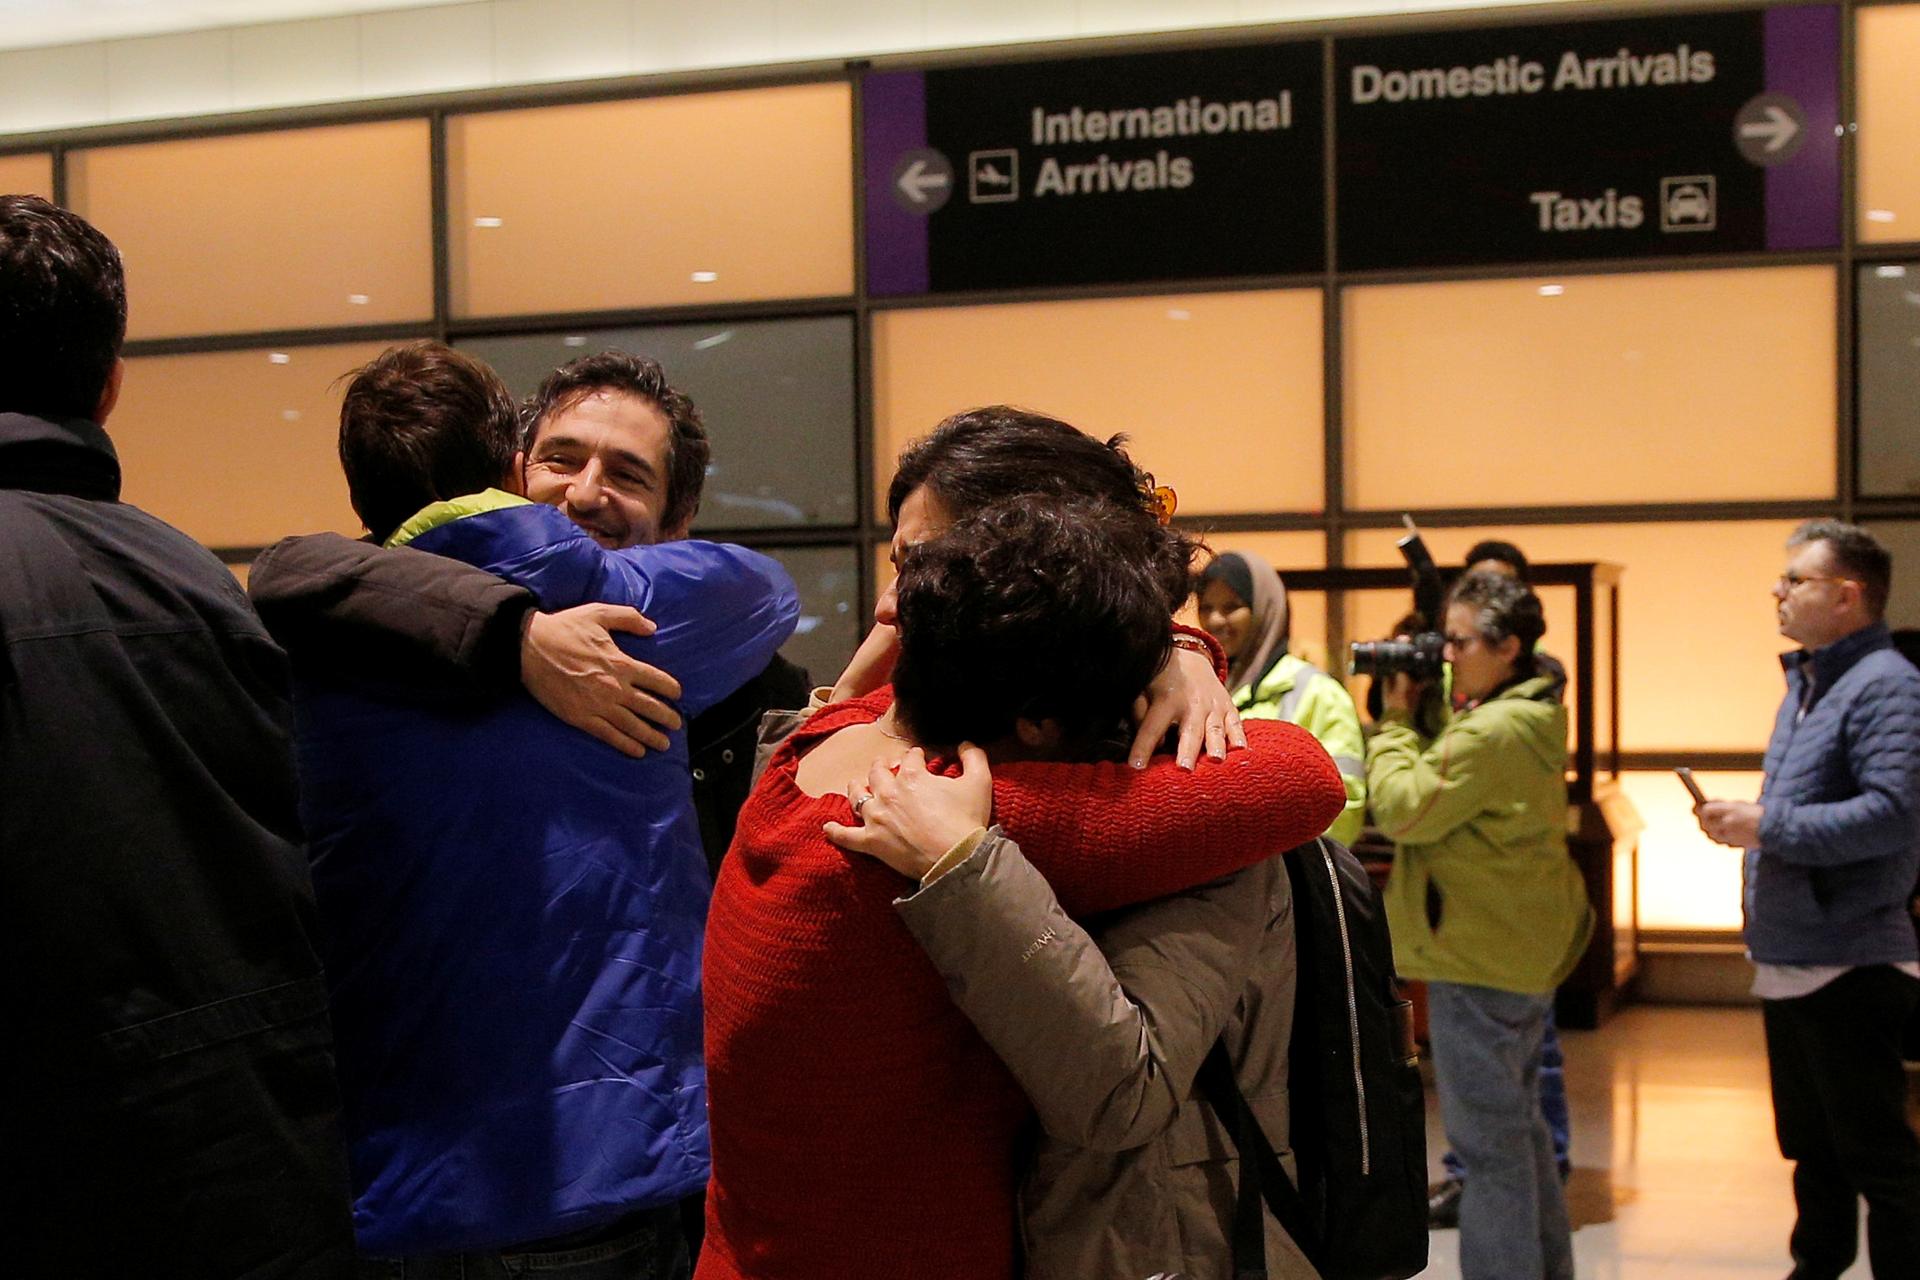 People hugging in front of airport arrival and departure signs